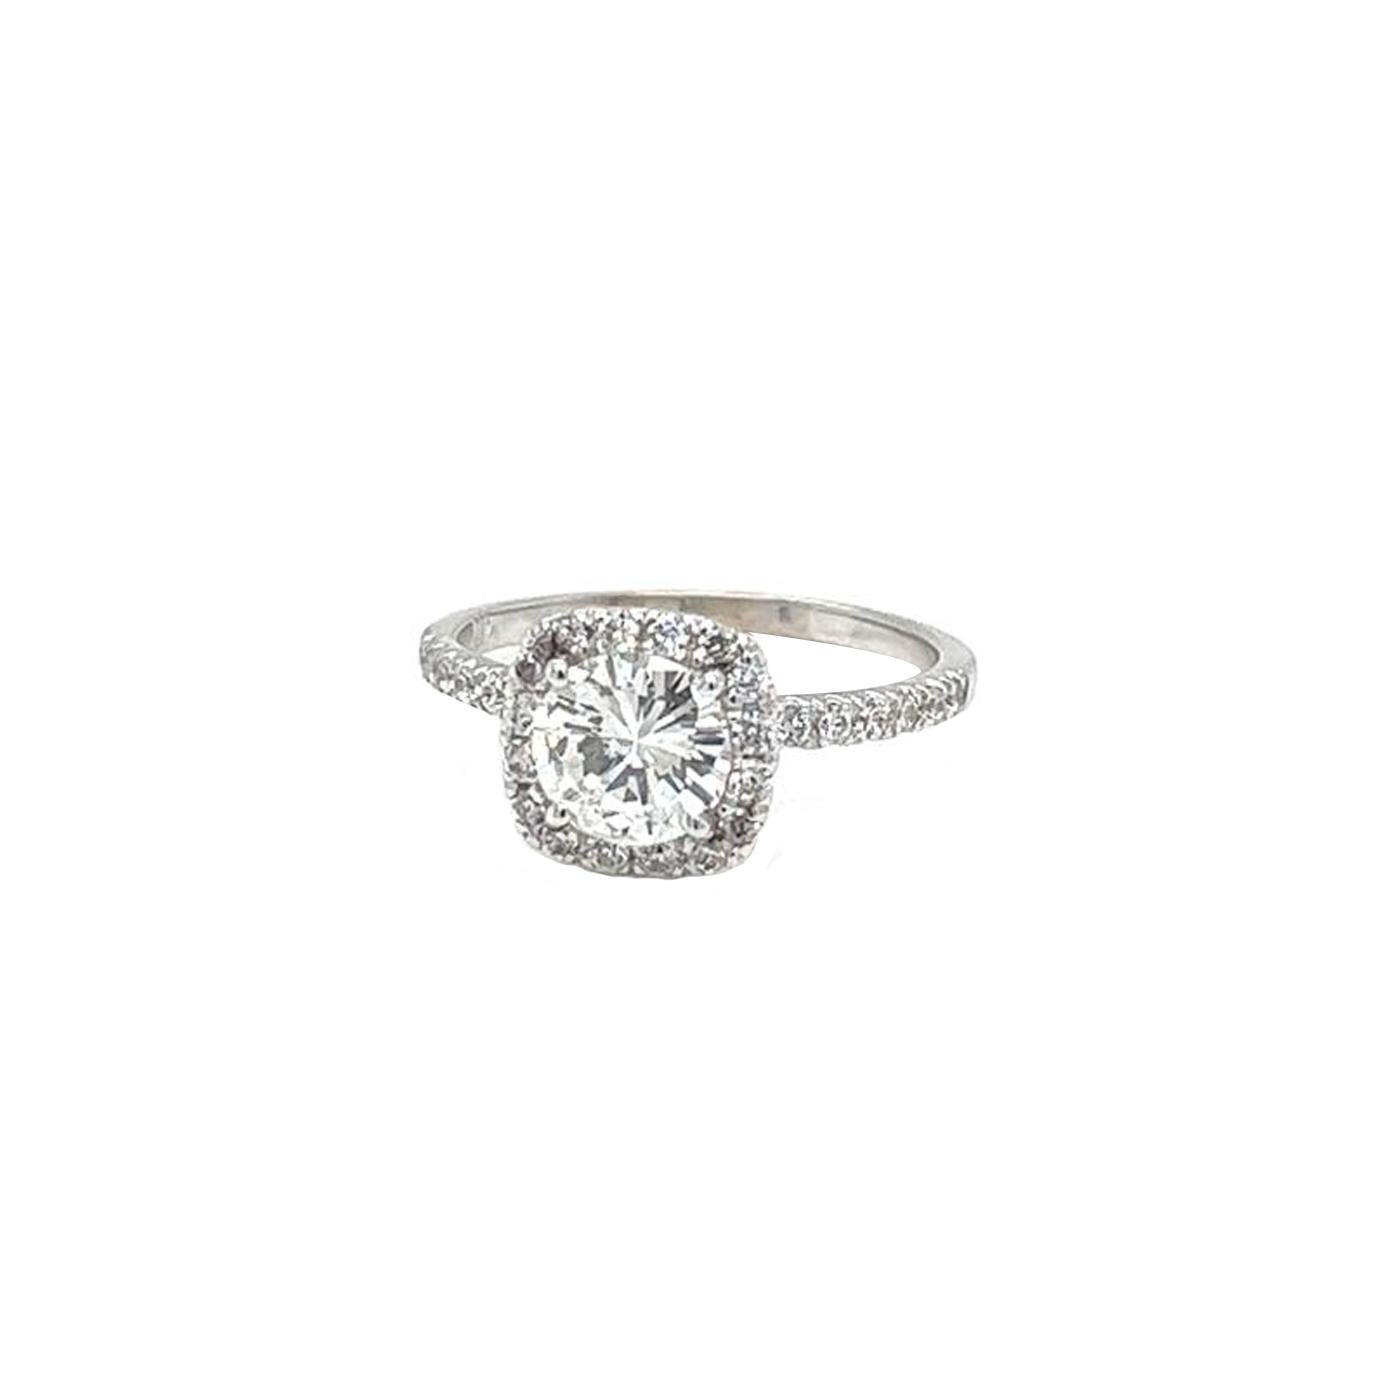 1.16ct Natural Round Diamond Ring With 0.45ct Pave Diamonds Color H Clarity VS2 For Sale 3